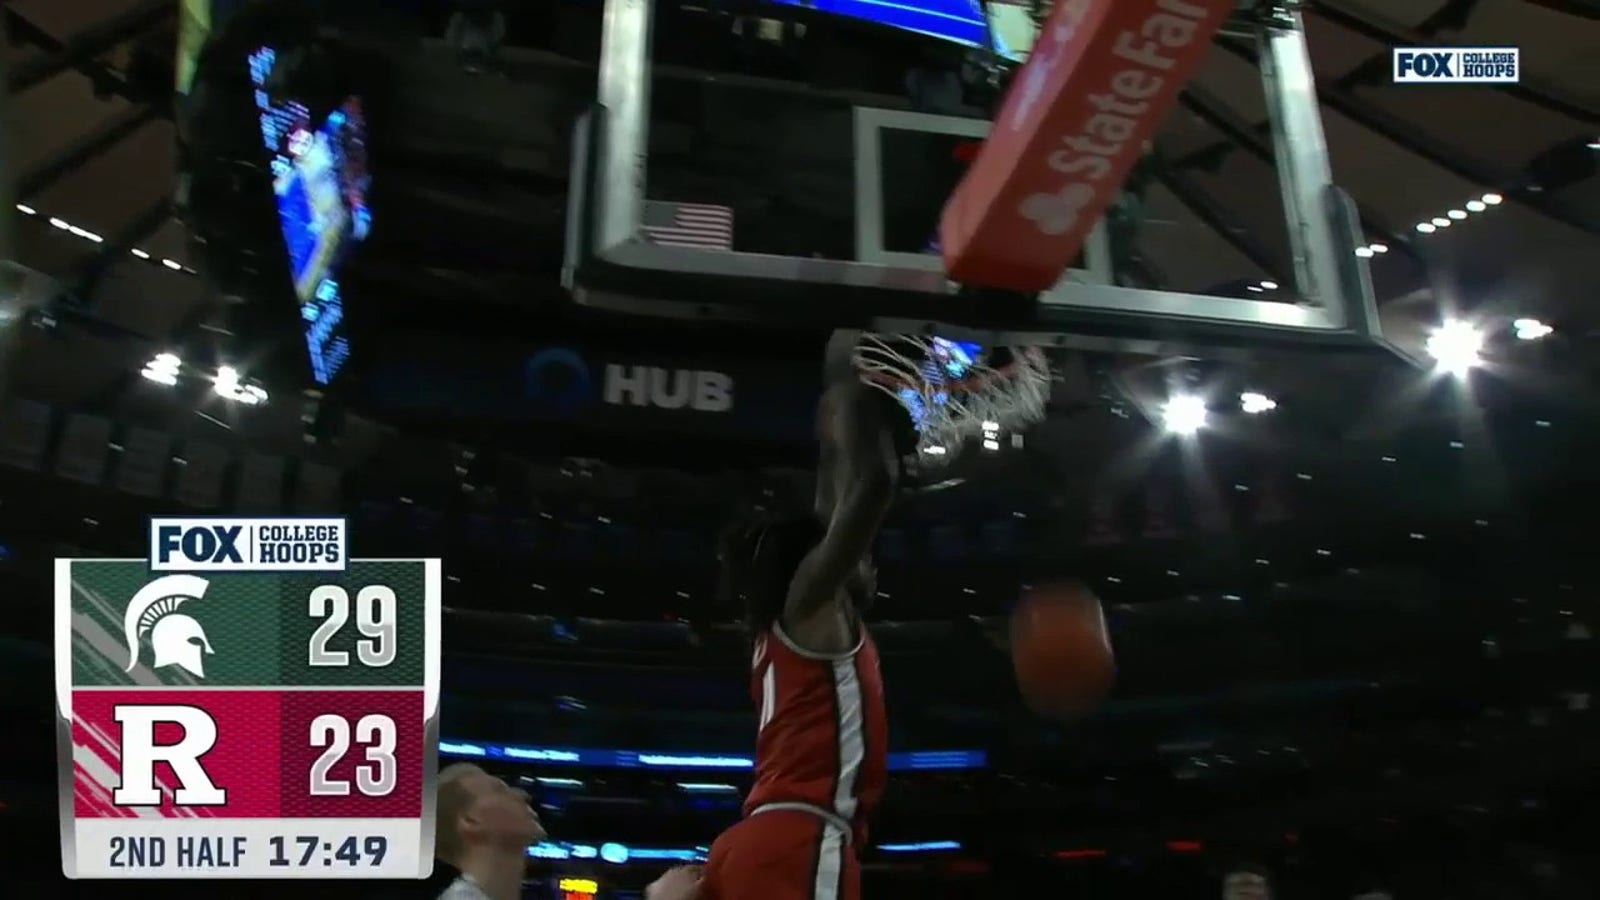 Rutgers with the alley-oop!